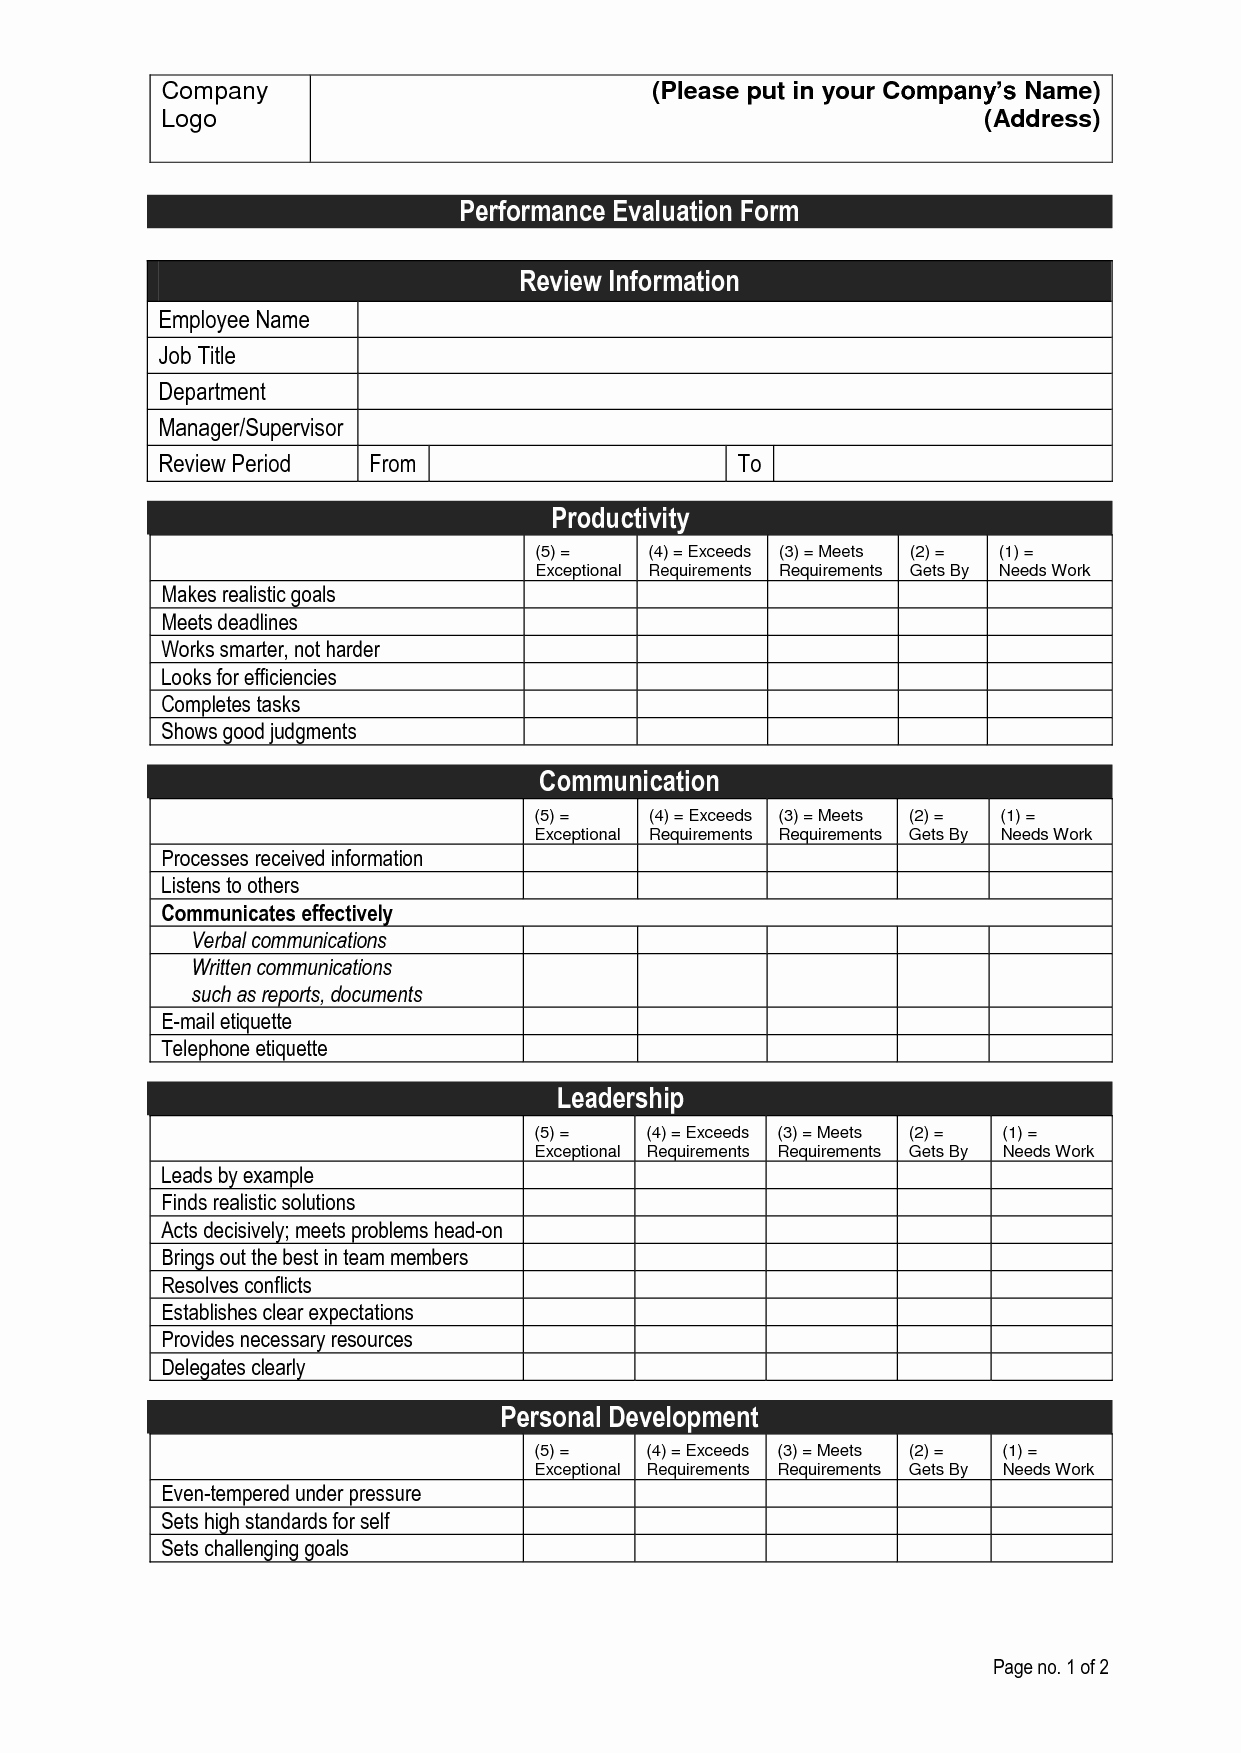 Free Employee Evaluation forms Templates Luxury Job Performance Evaluation Frompo 1